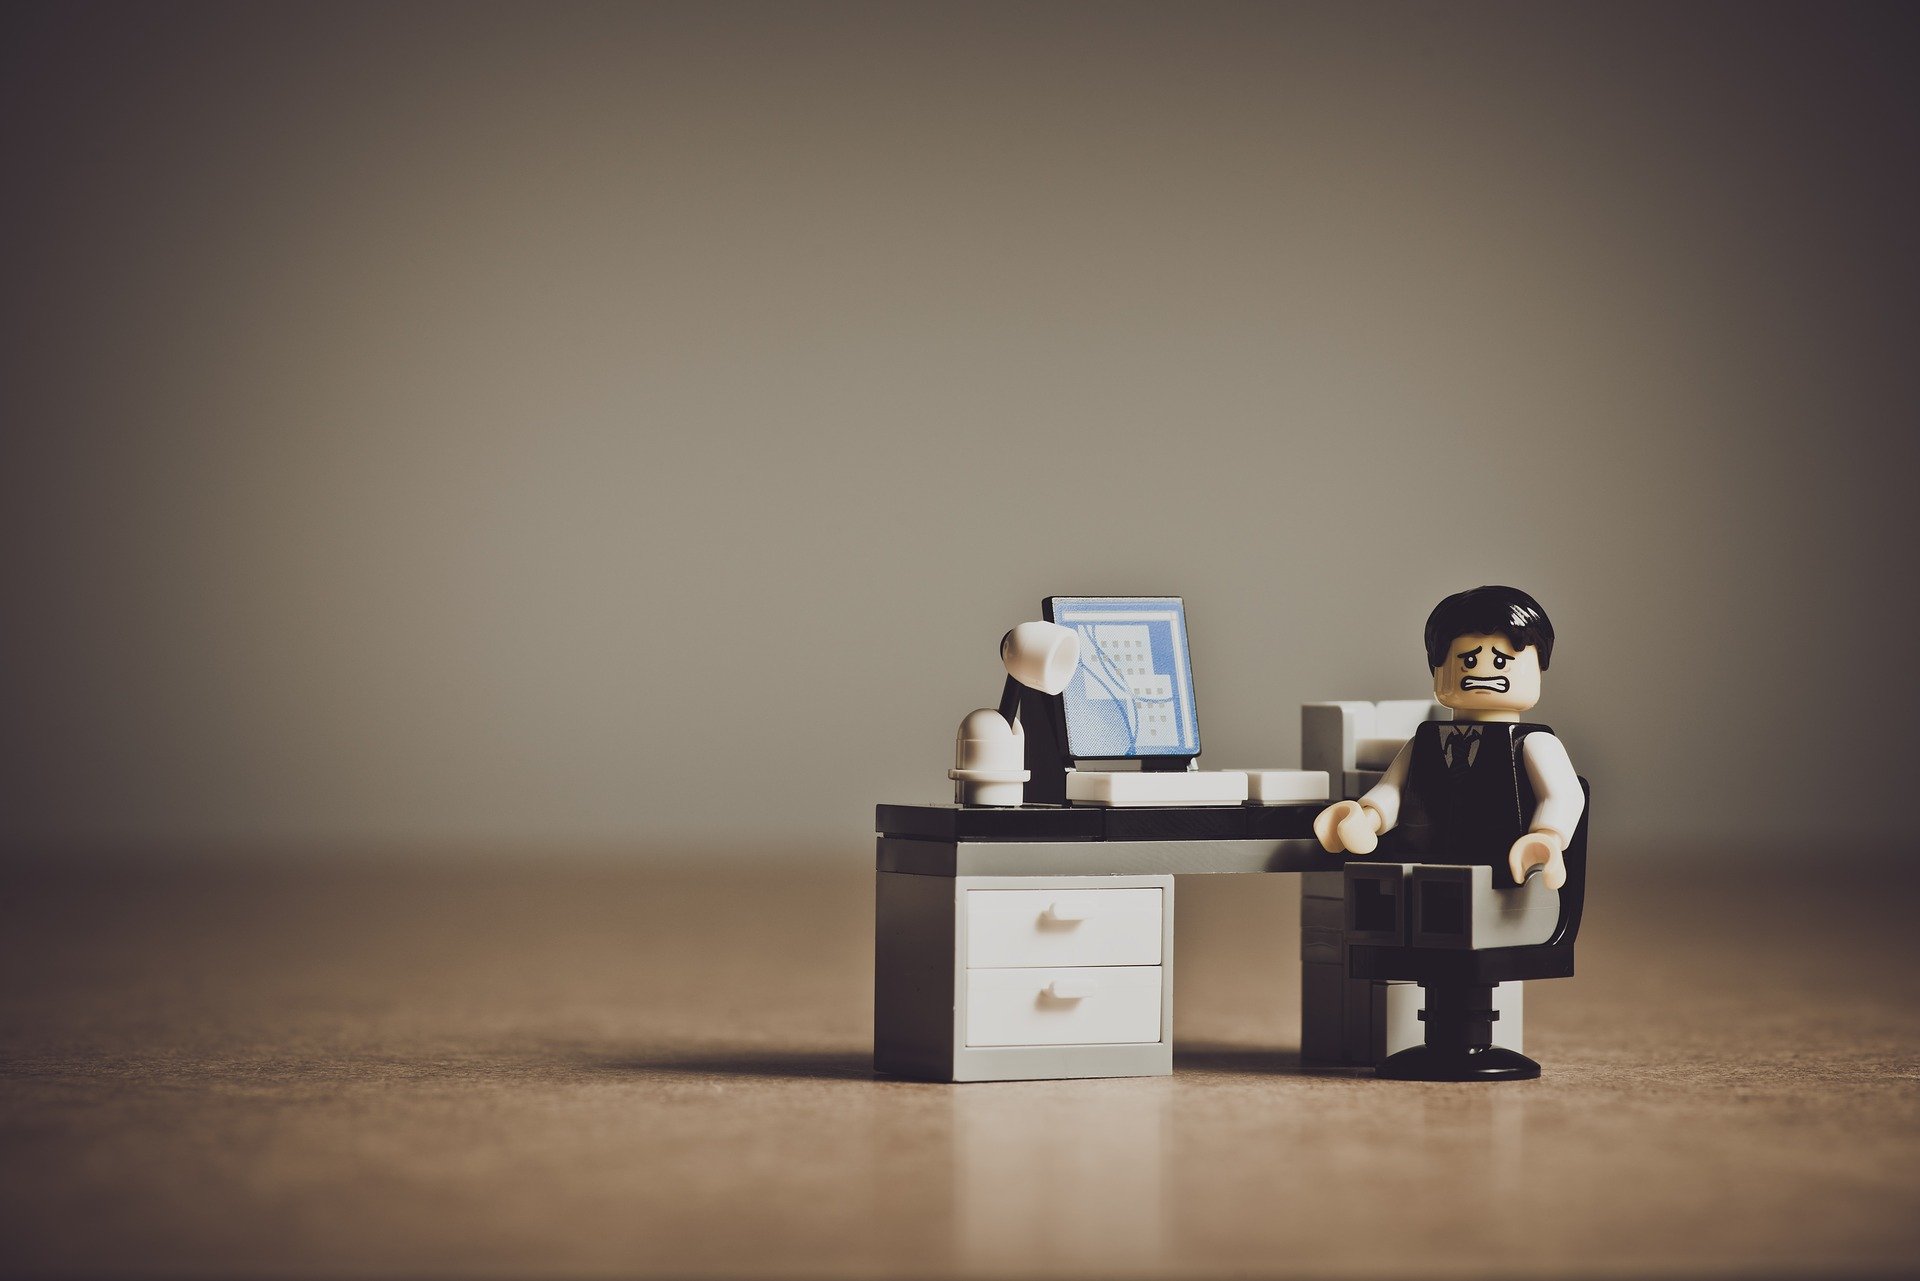 A toy figure seen working at a desk